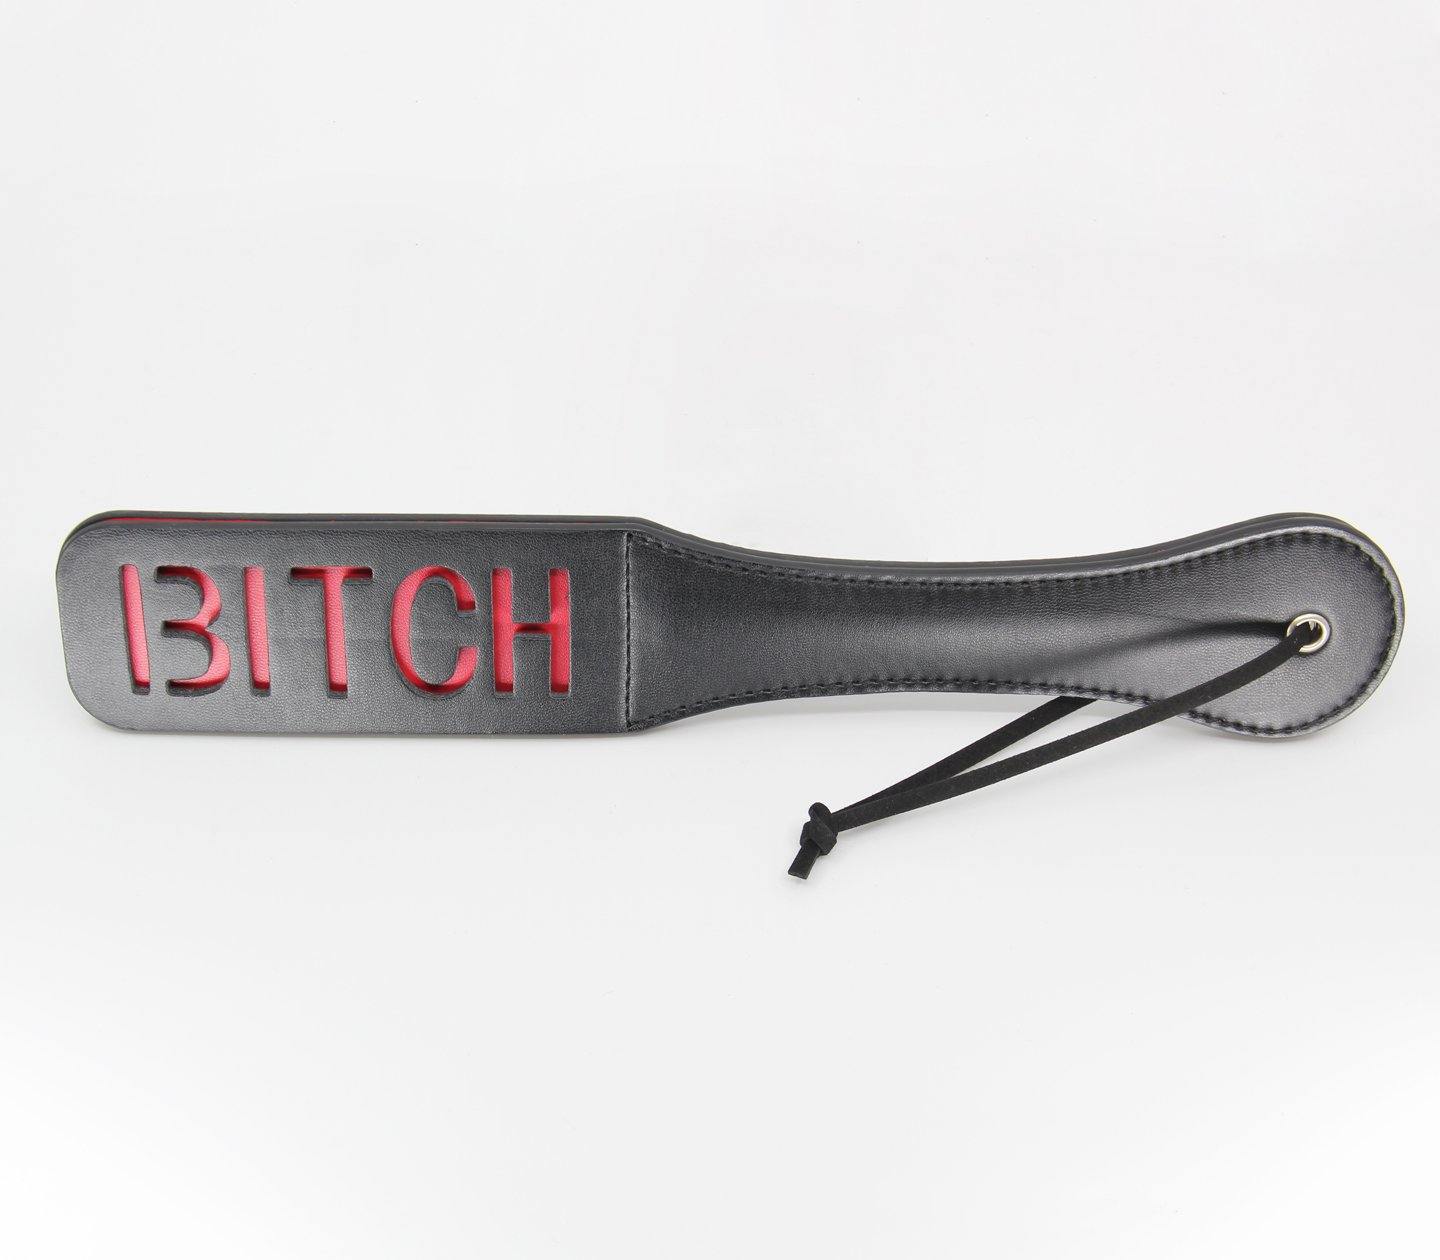 Berlin Baby 'BITCH' Vegan Leather Slapper Paddle - HOUSE OF HALFORD